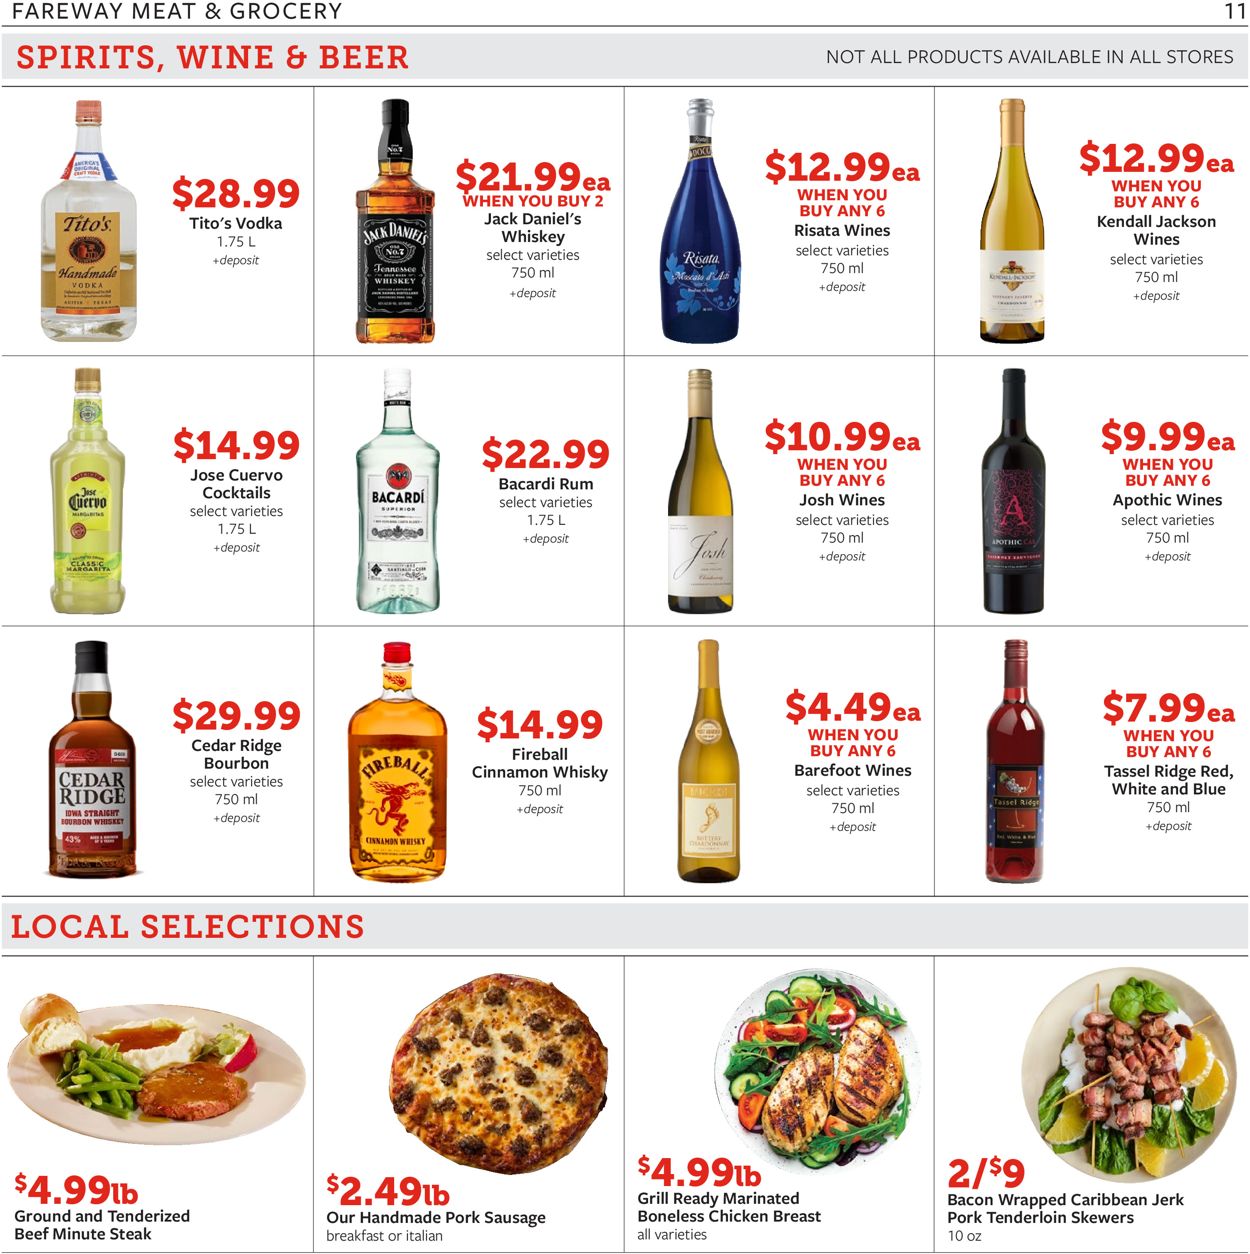 Fareway Ad from 08/31/2021